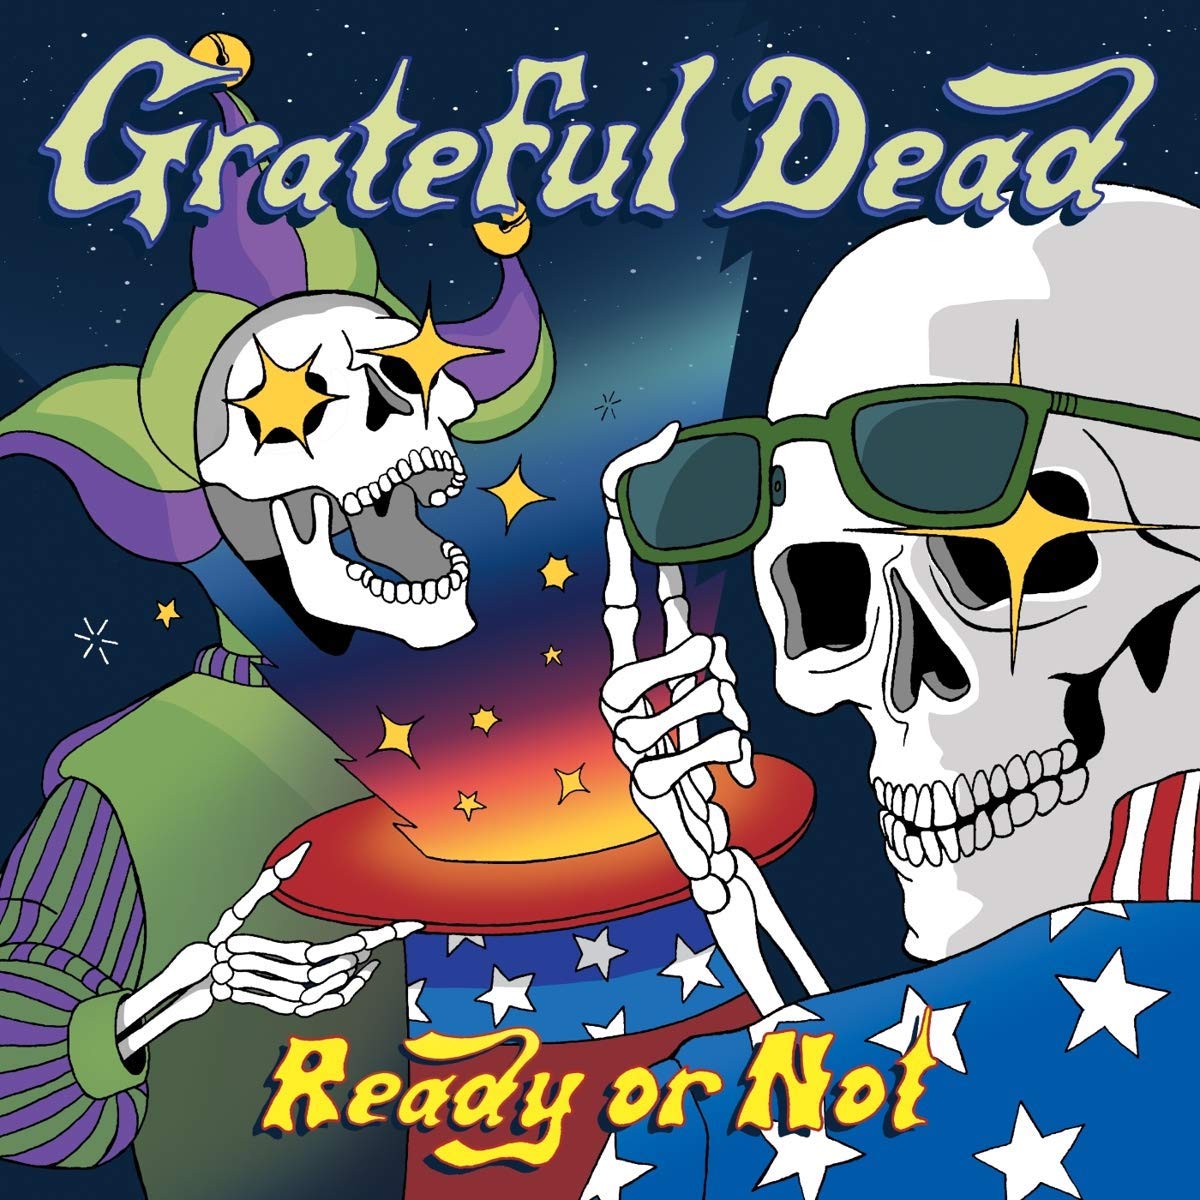 Grateful Dead: Ready or not